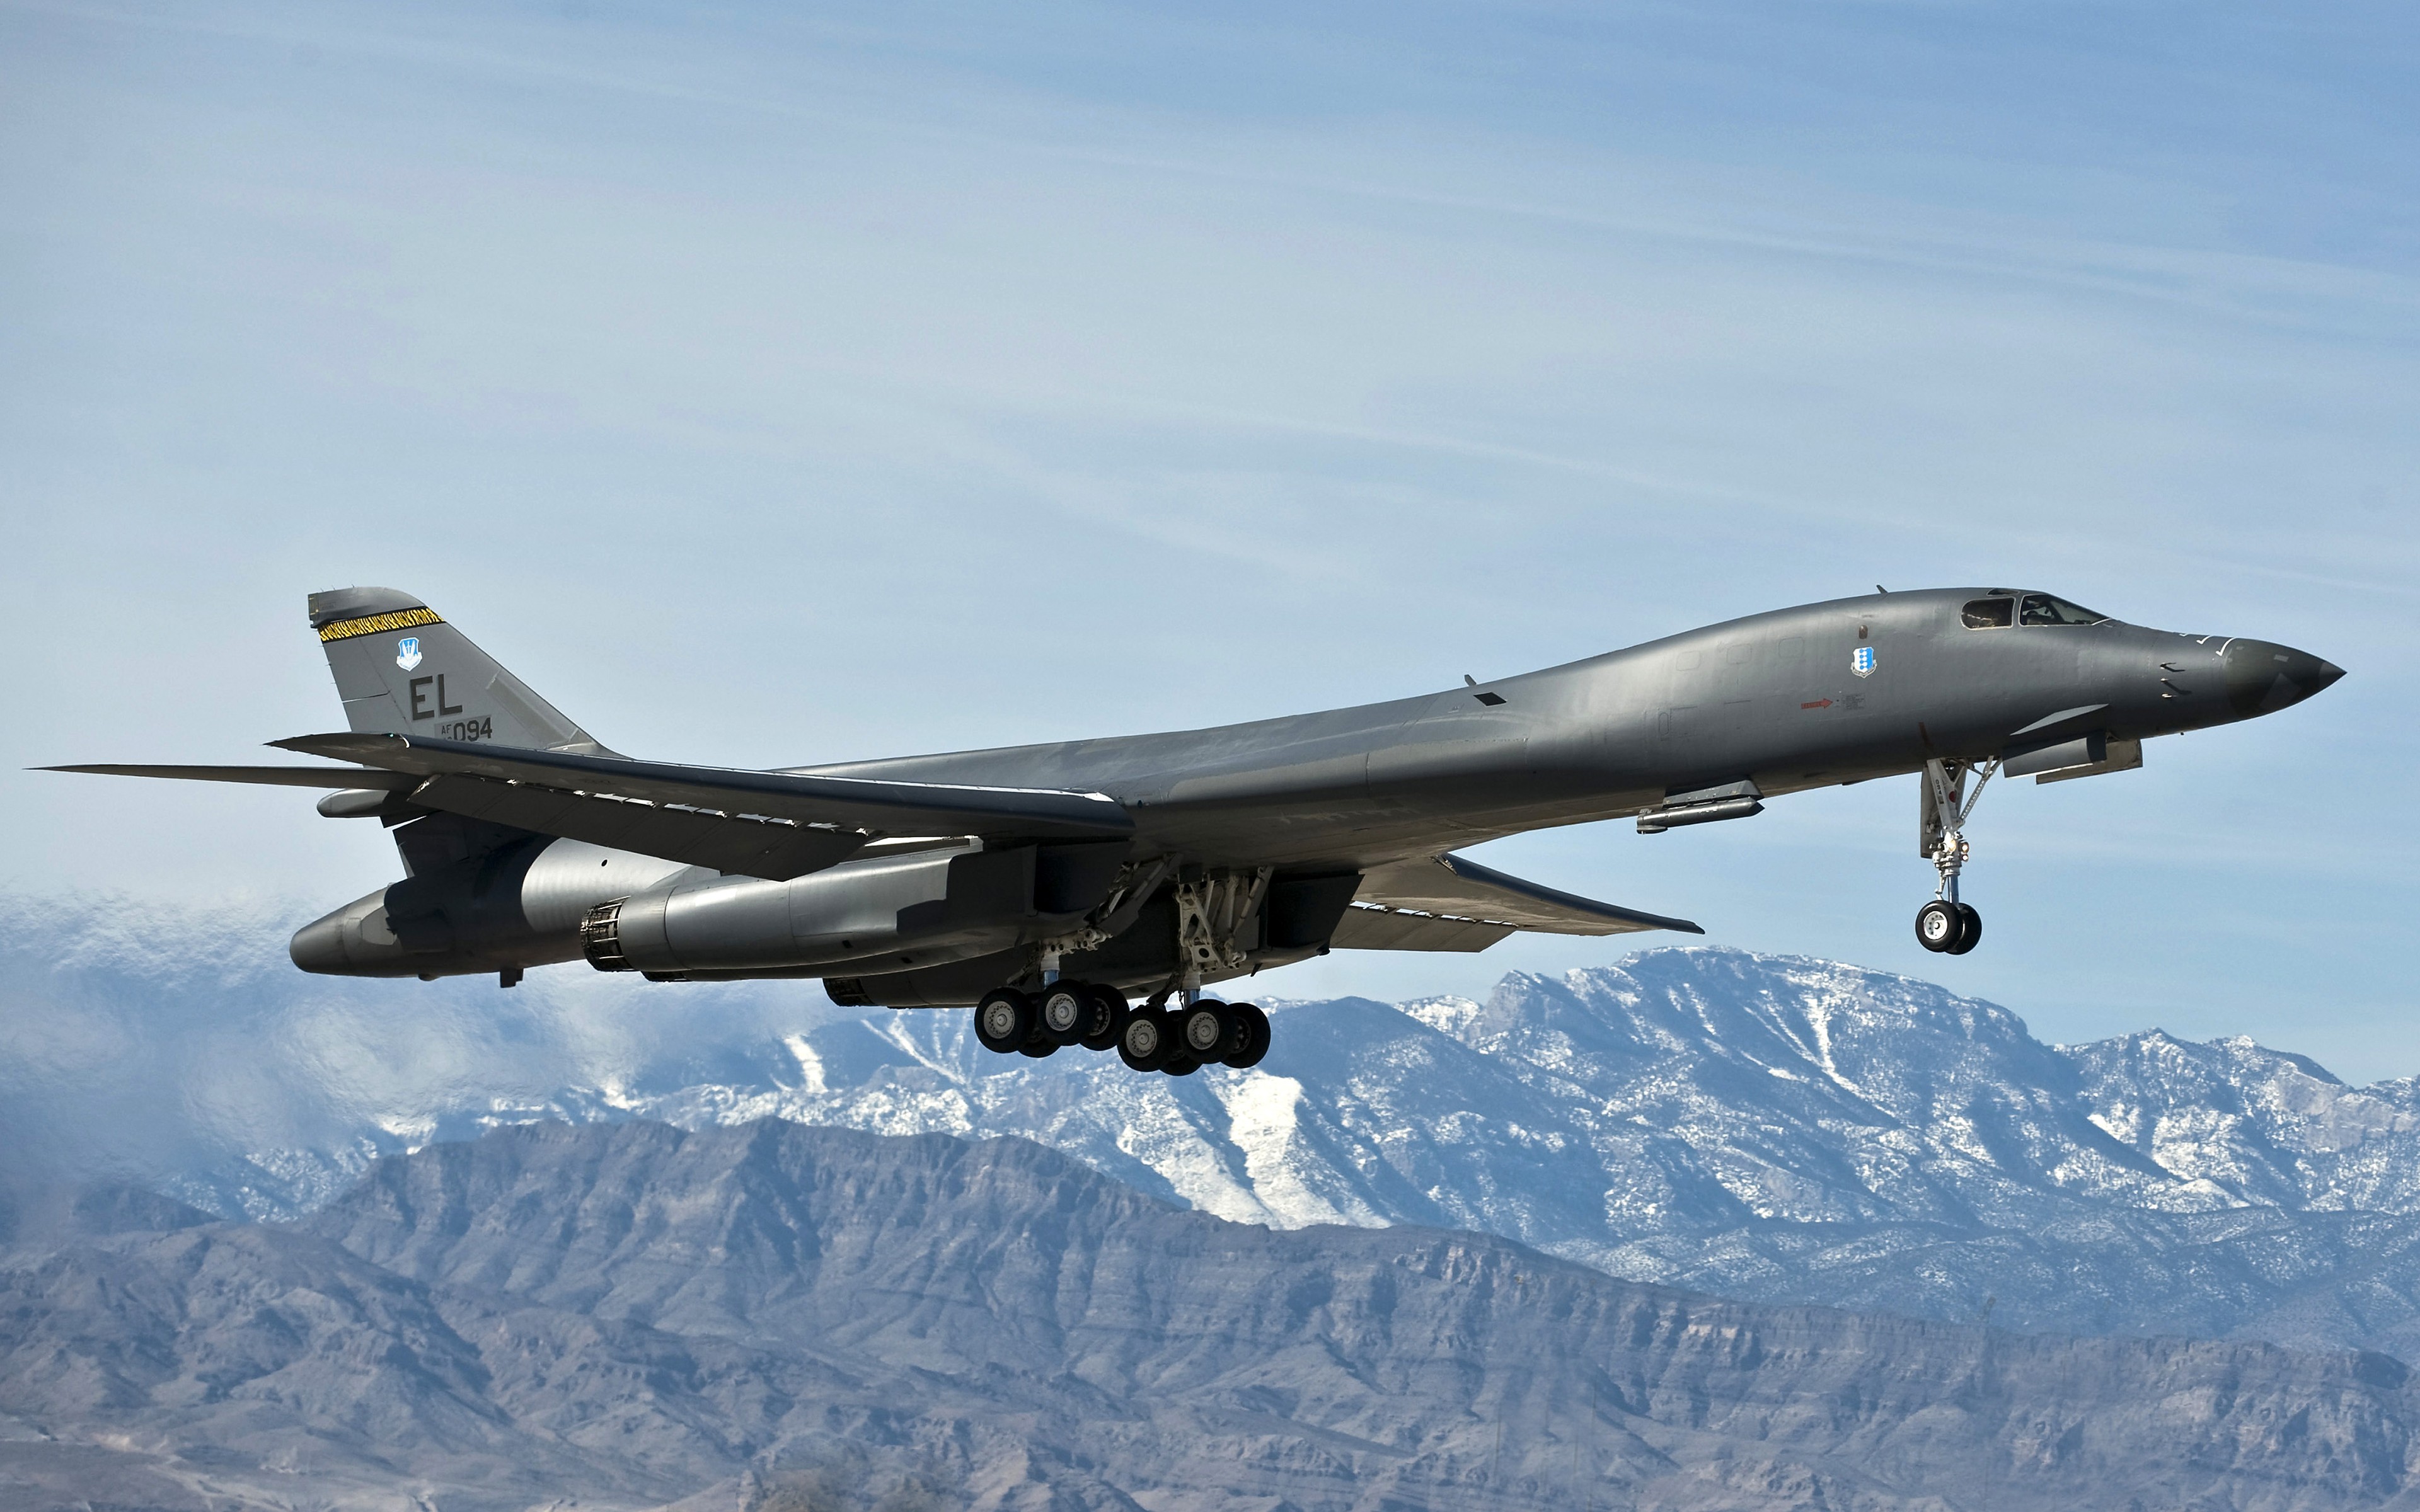 General 3840x2400 Rockwell B-1 Lancer military aircraft aircraft strategic bomber Bomber vehicle military